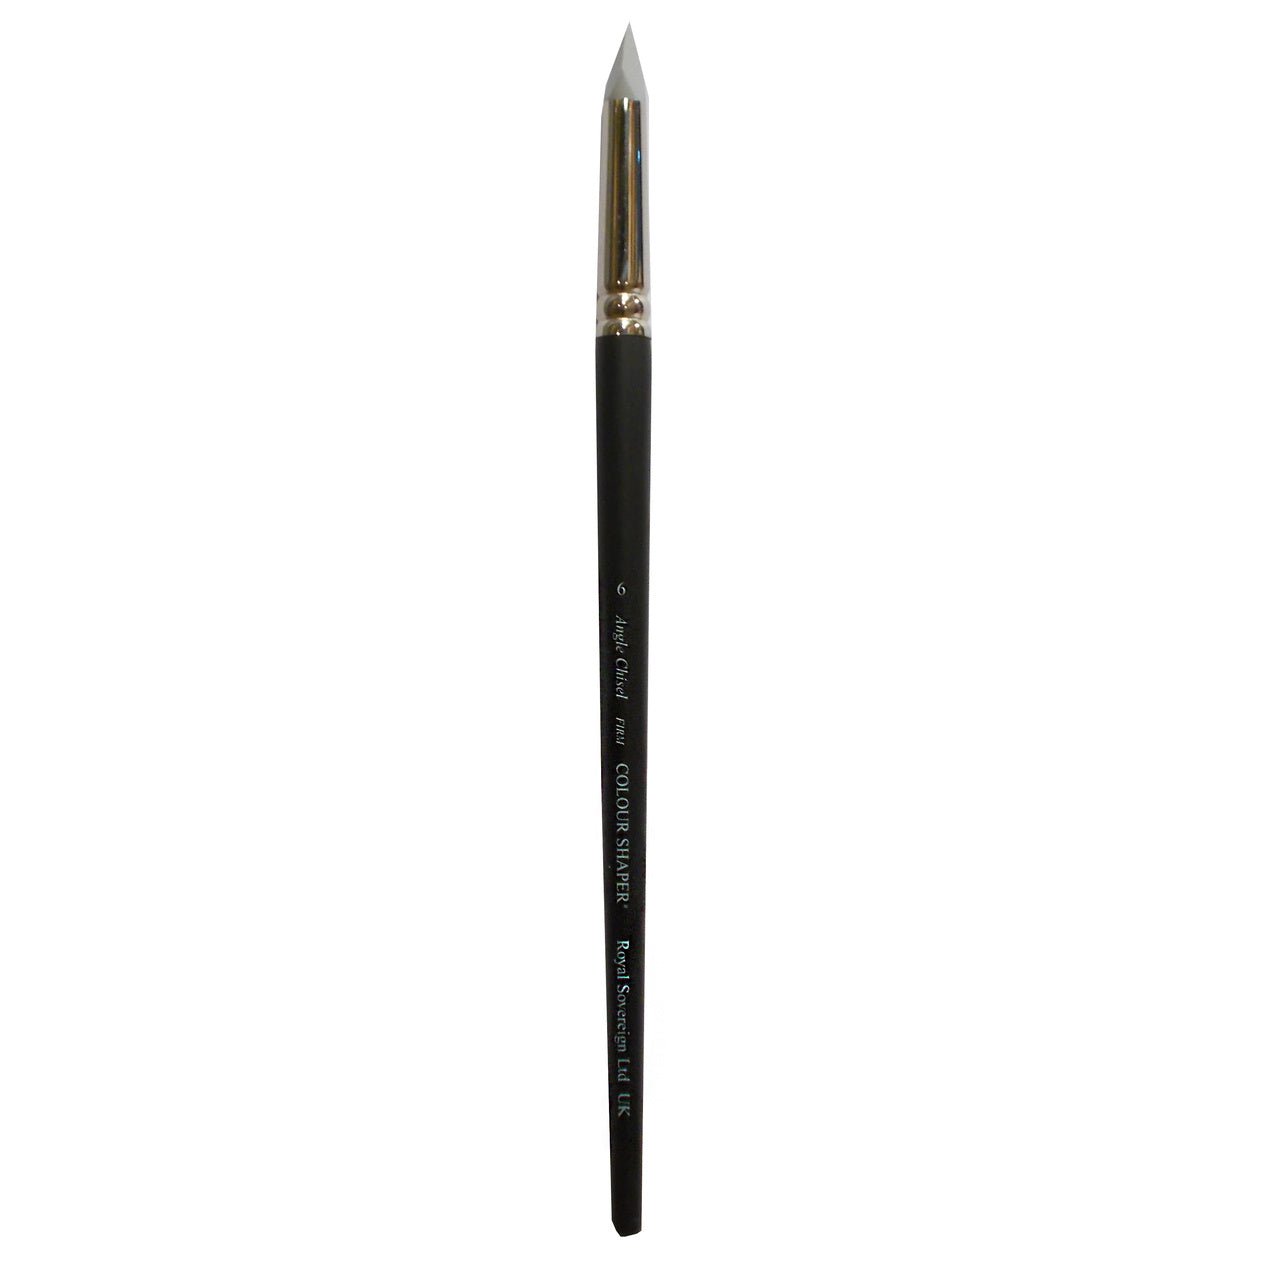 Colour Shaper - Firm - Angle Chisel 6 - merriartist.com